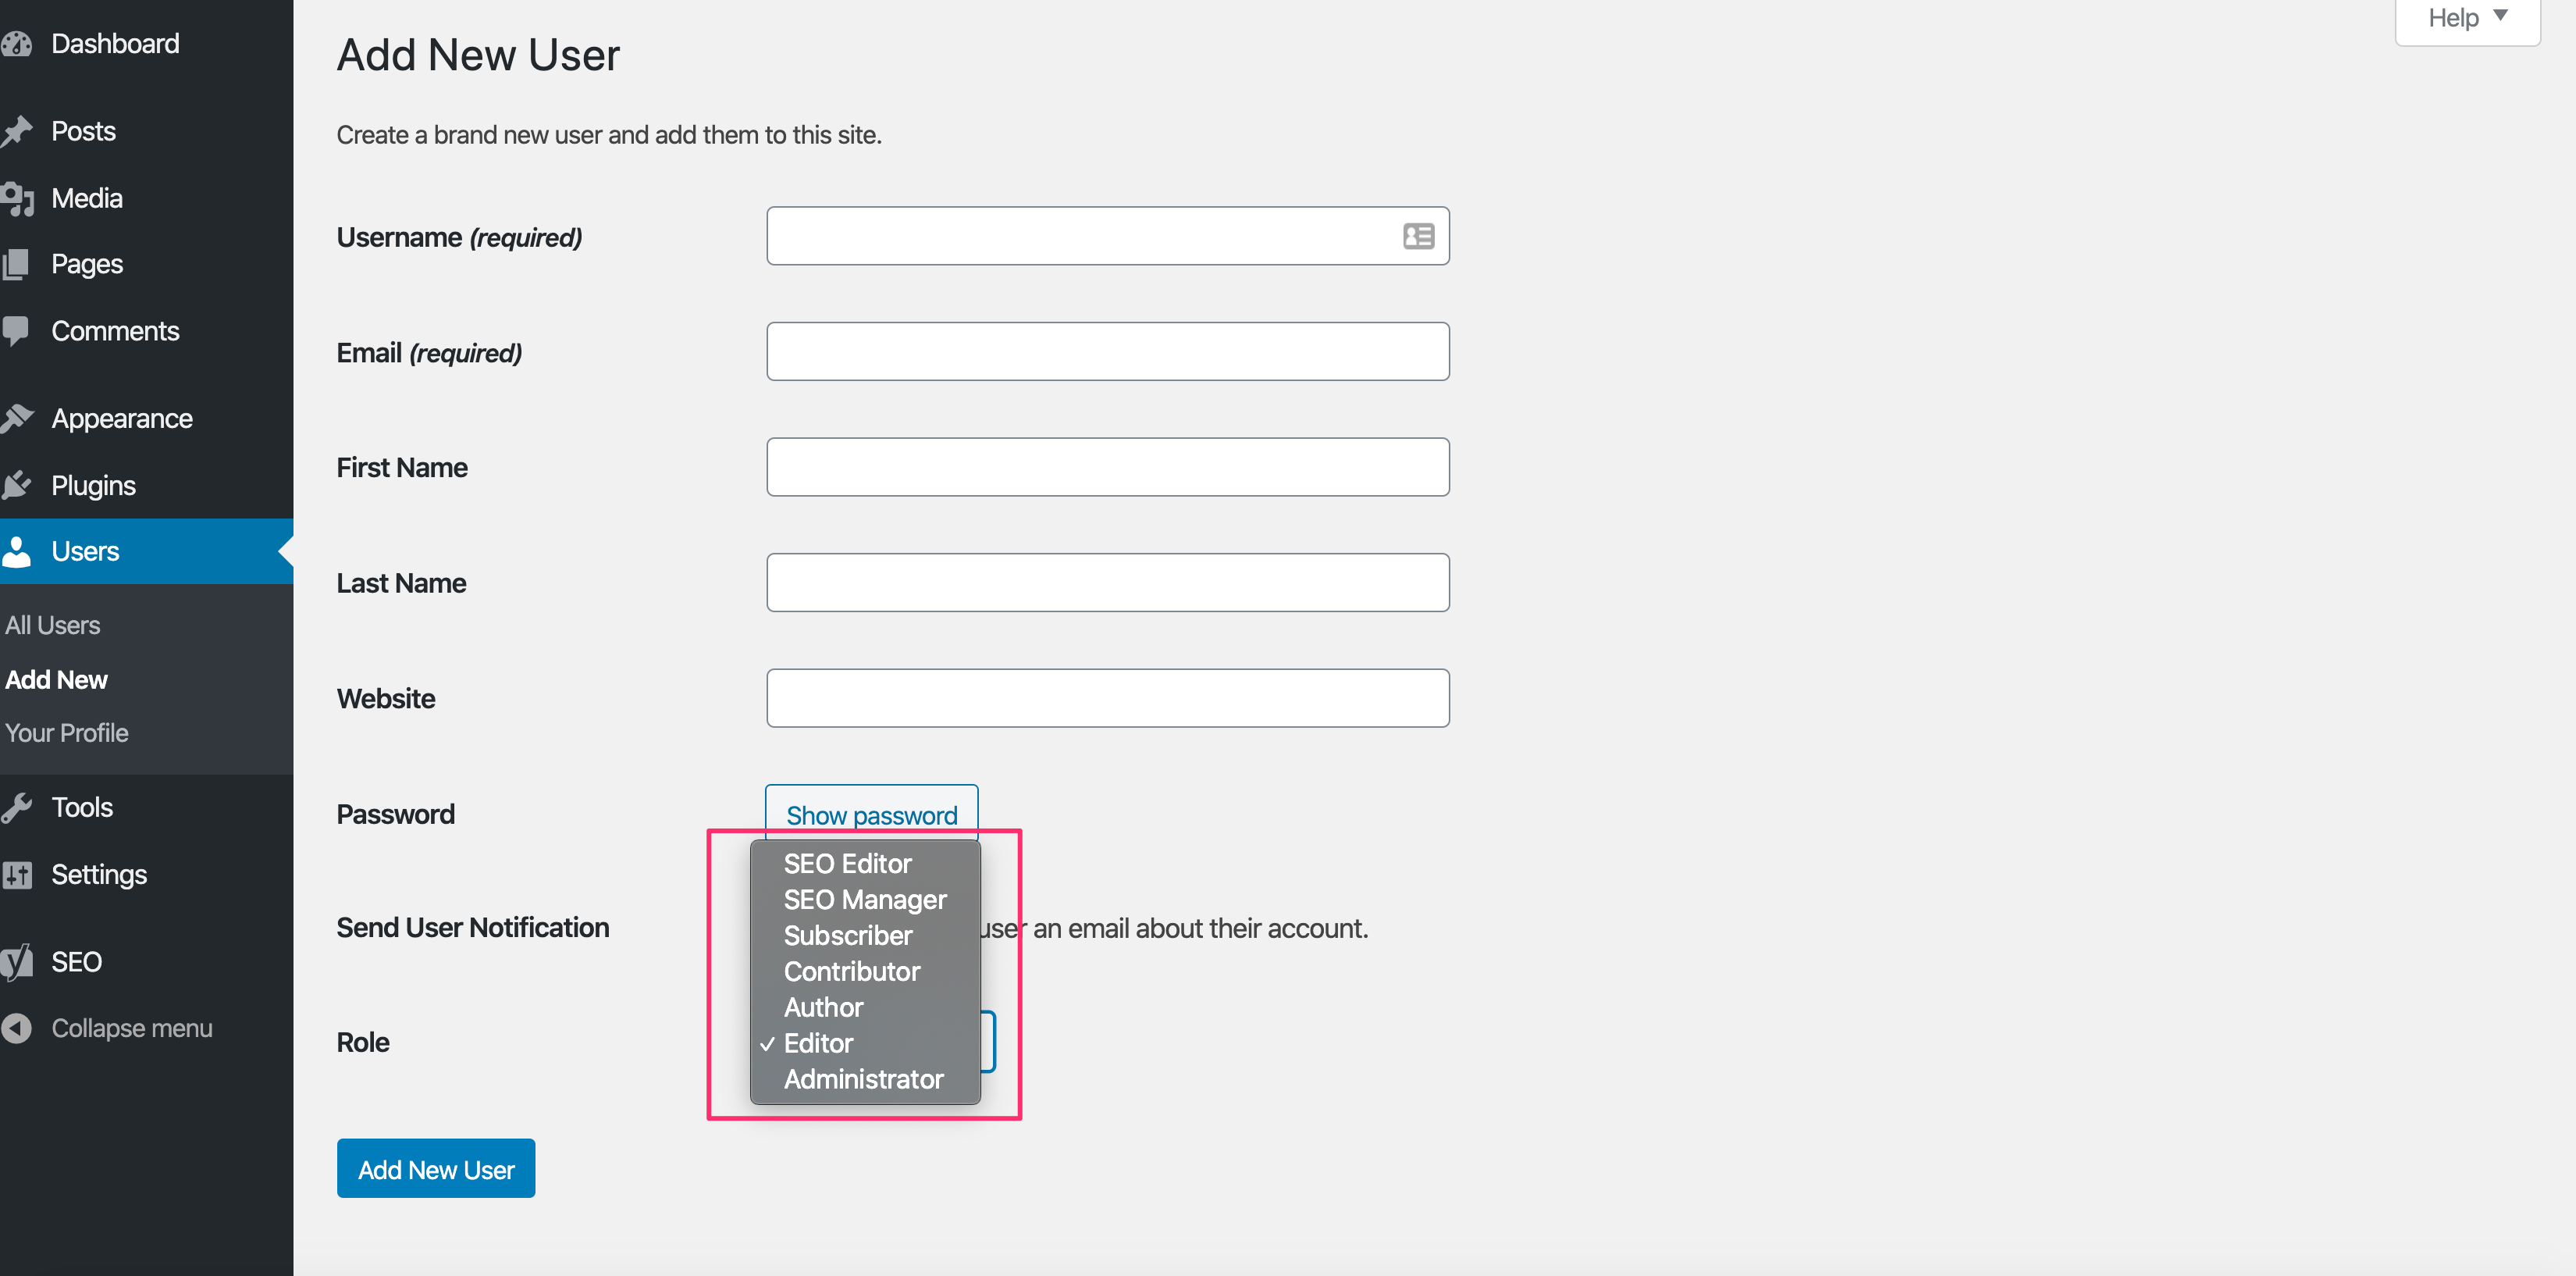 The role options in the Add New User screen in WordPress